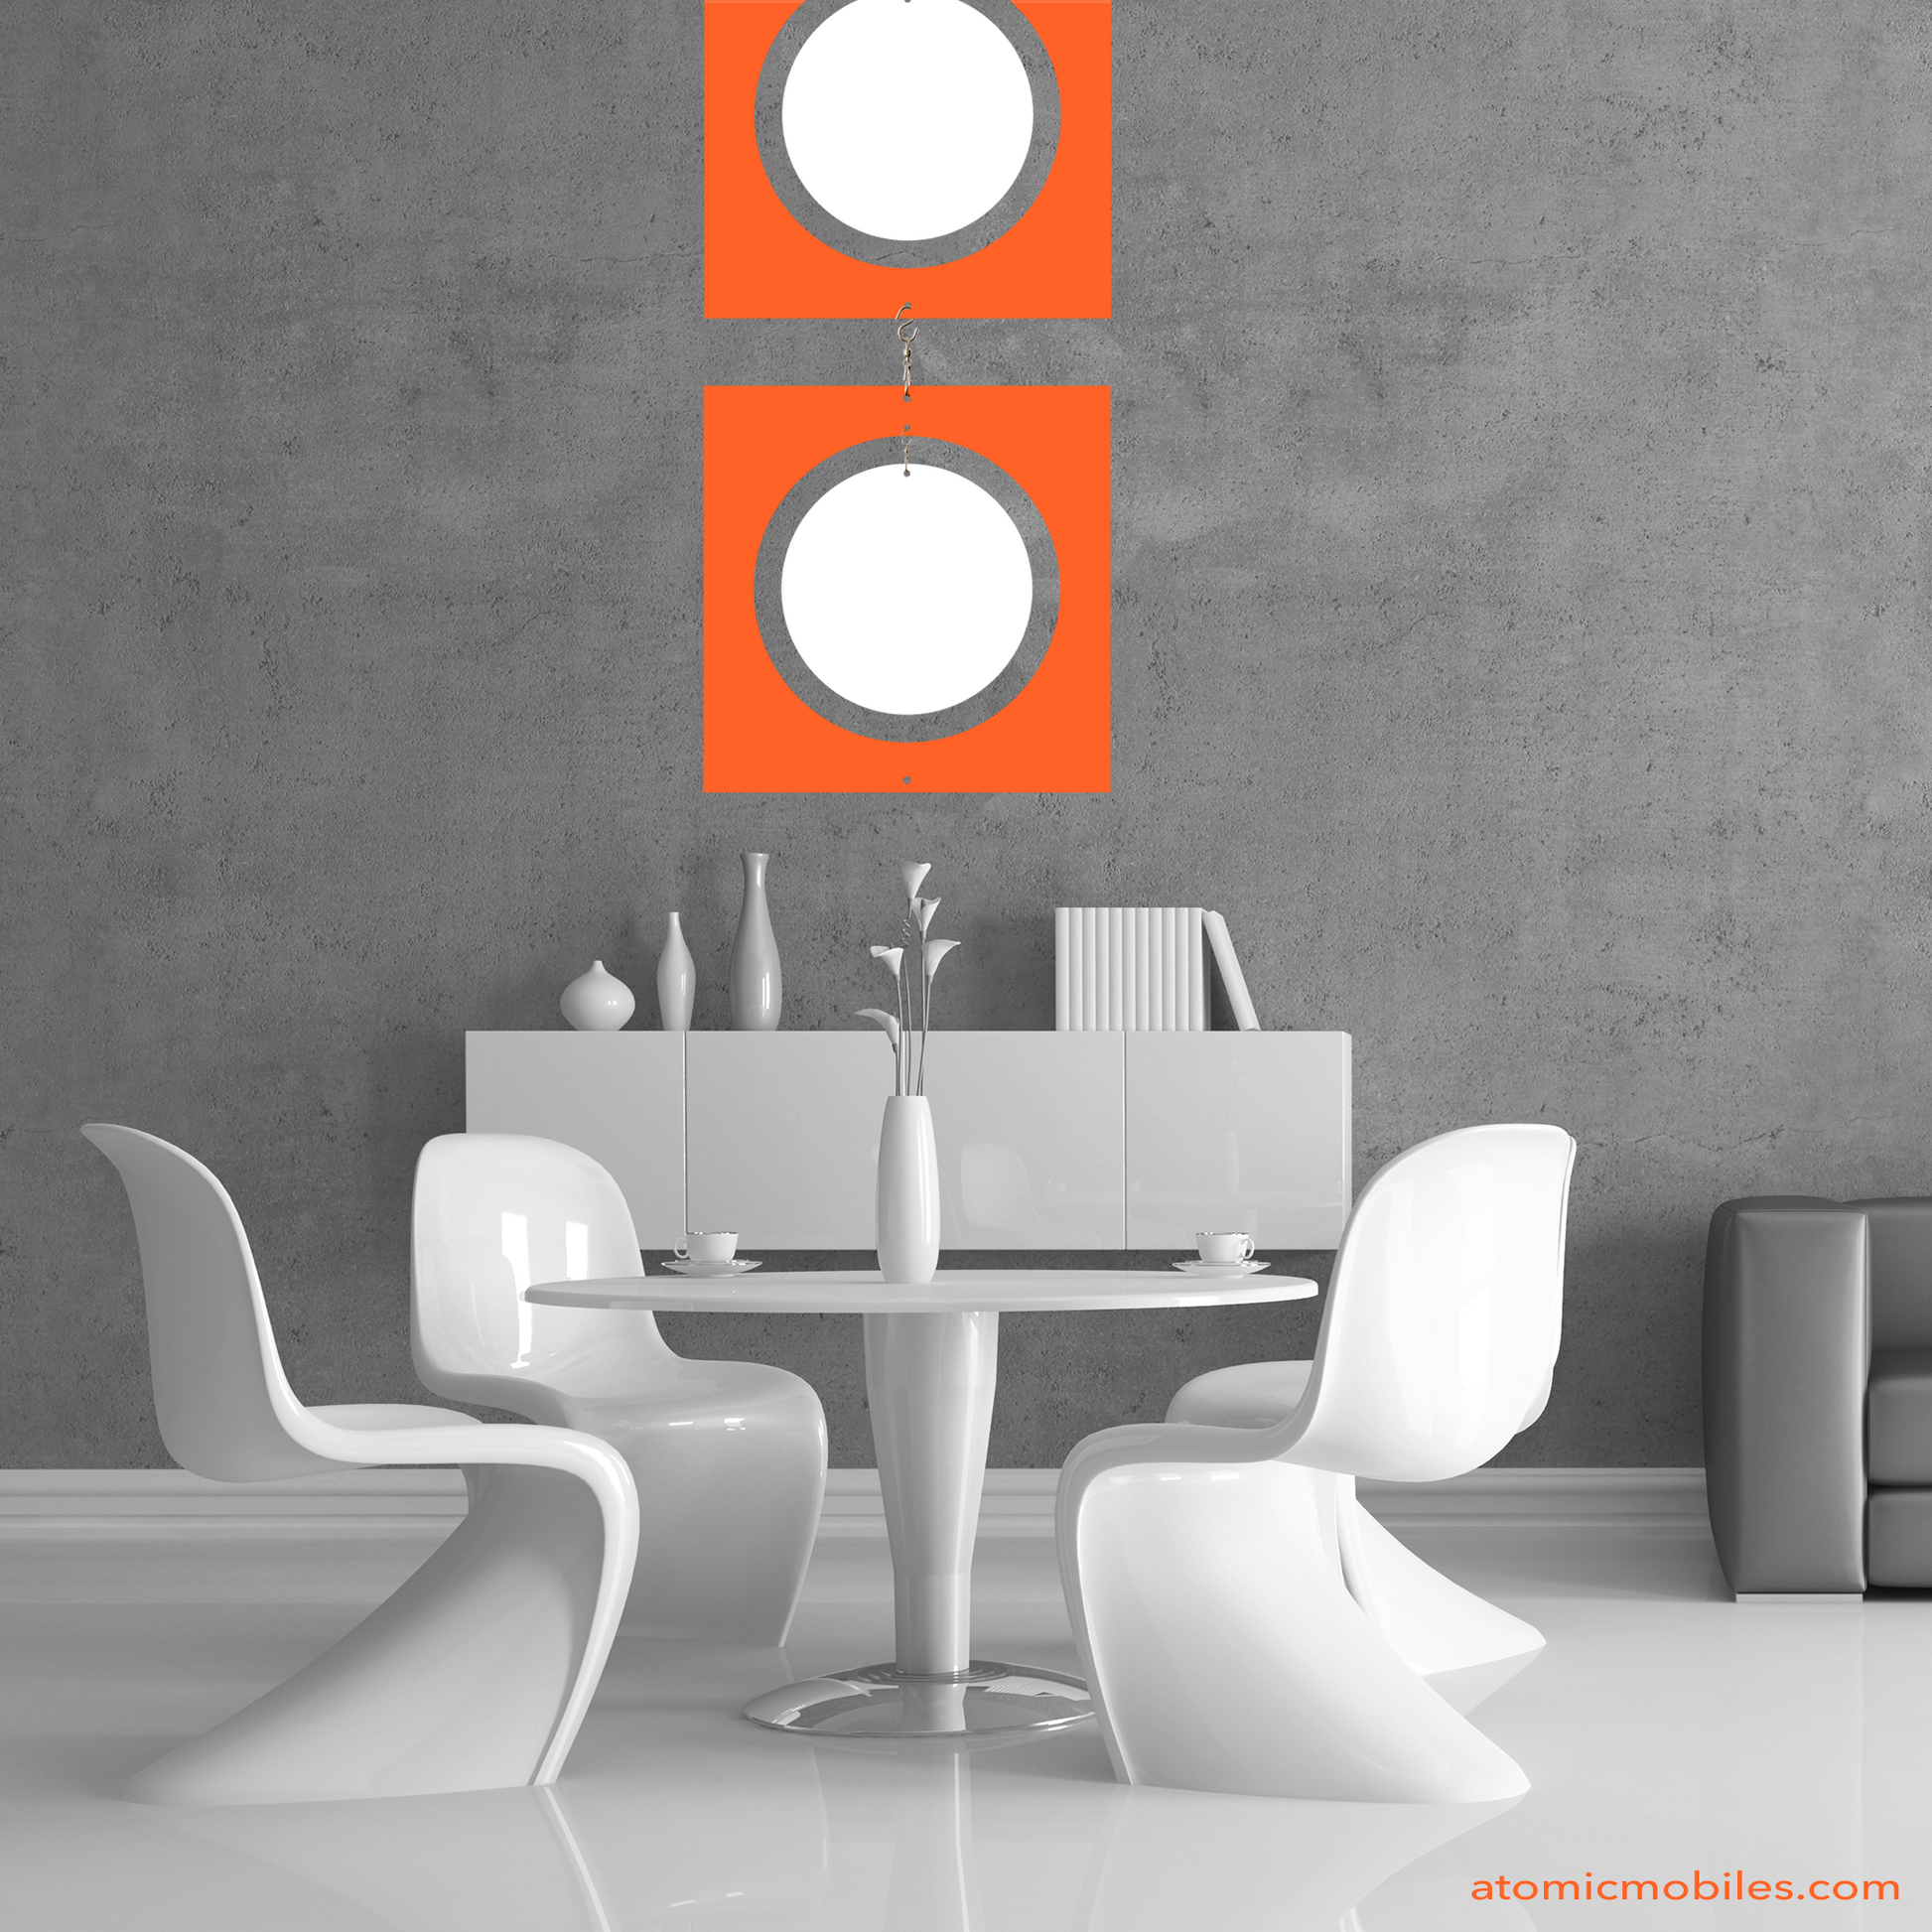 Opaque Orange and White XXL SEVENTIES AF hanging art mobile in elegant retro modern gray room with Panton chairs and white floor - mobile by AtomicMobiles.com